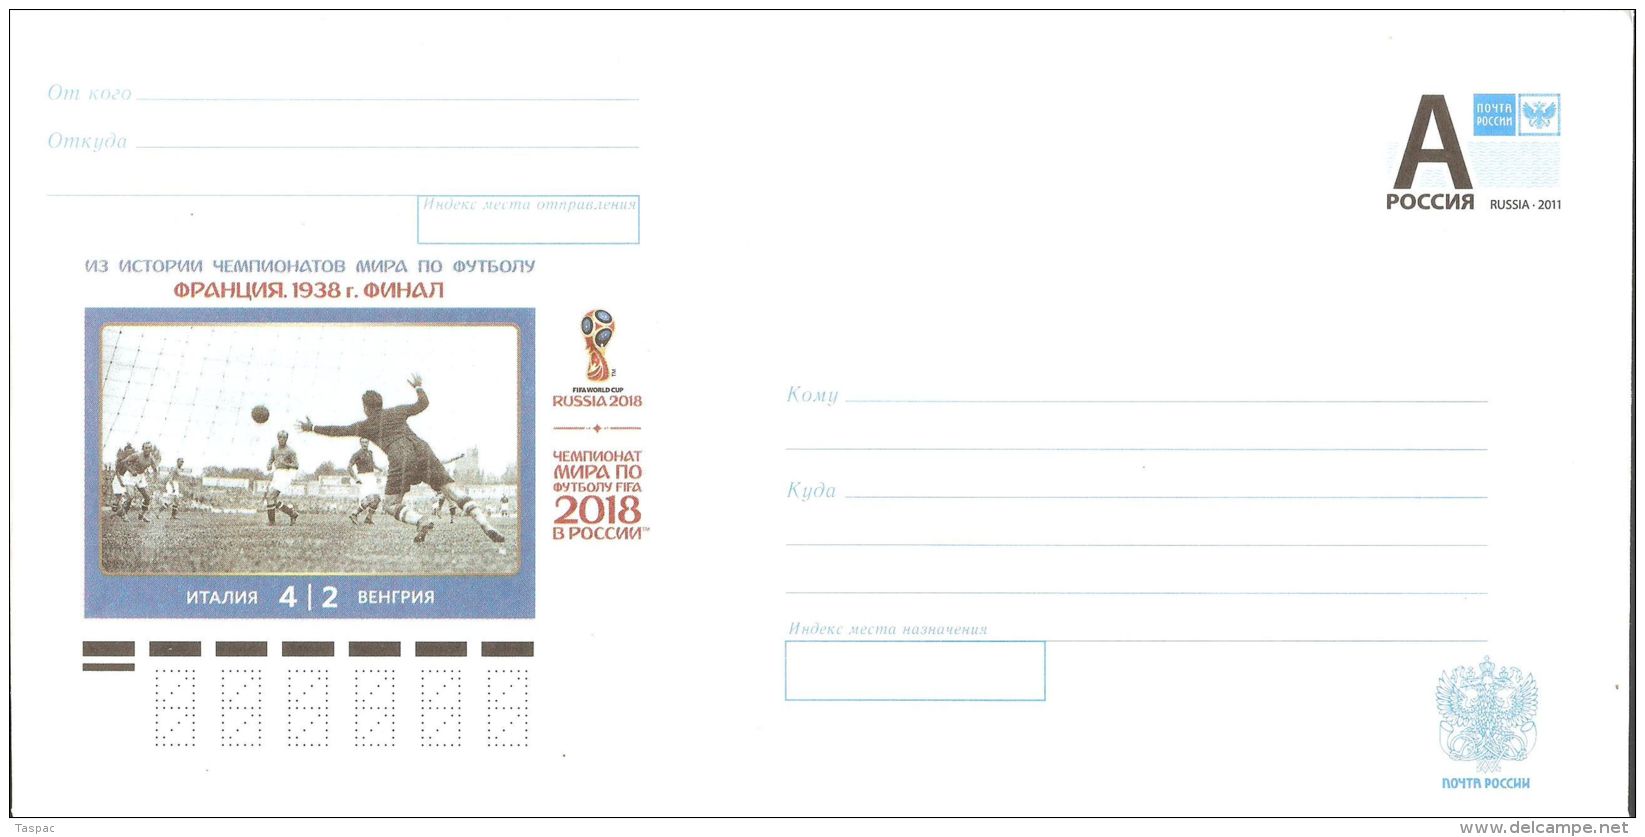 Russia 2015 # 141 Postal Stationery Cover Unused - History Of World Cup Soccer Championship, France 1938 - 2018 – Russia